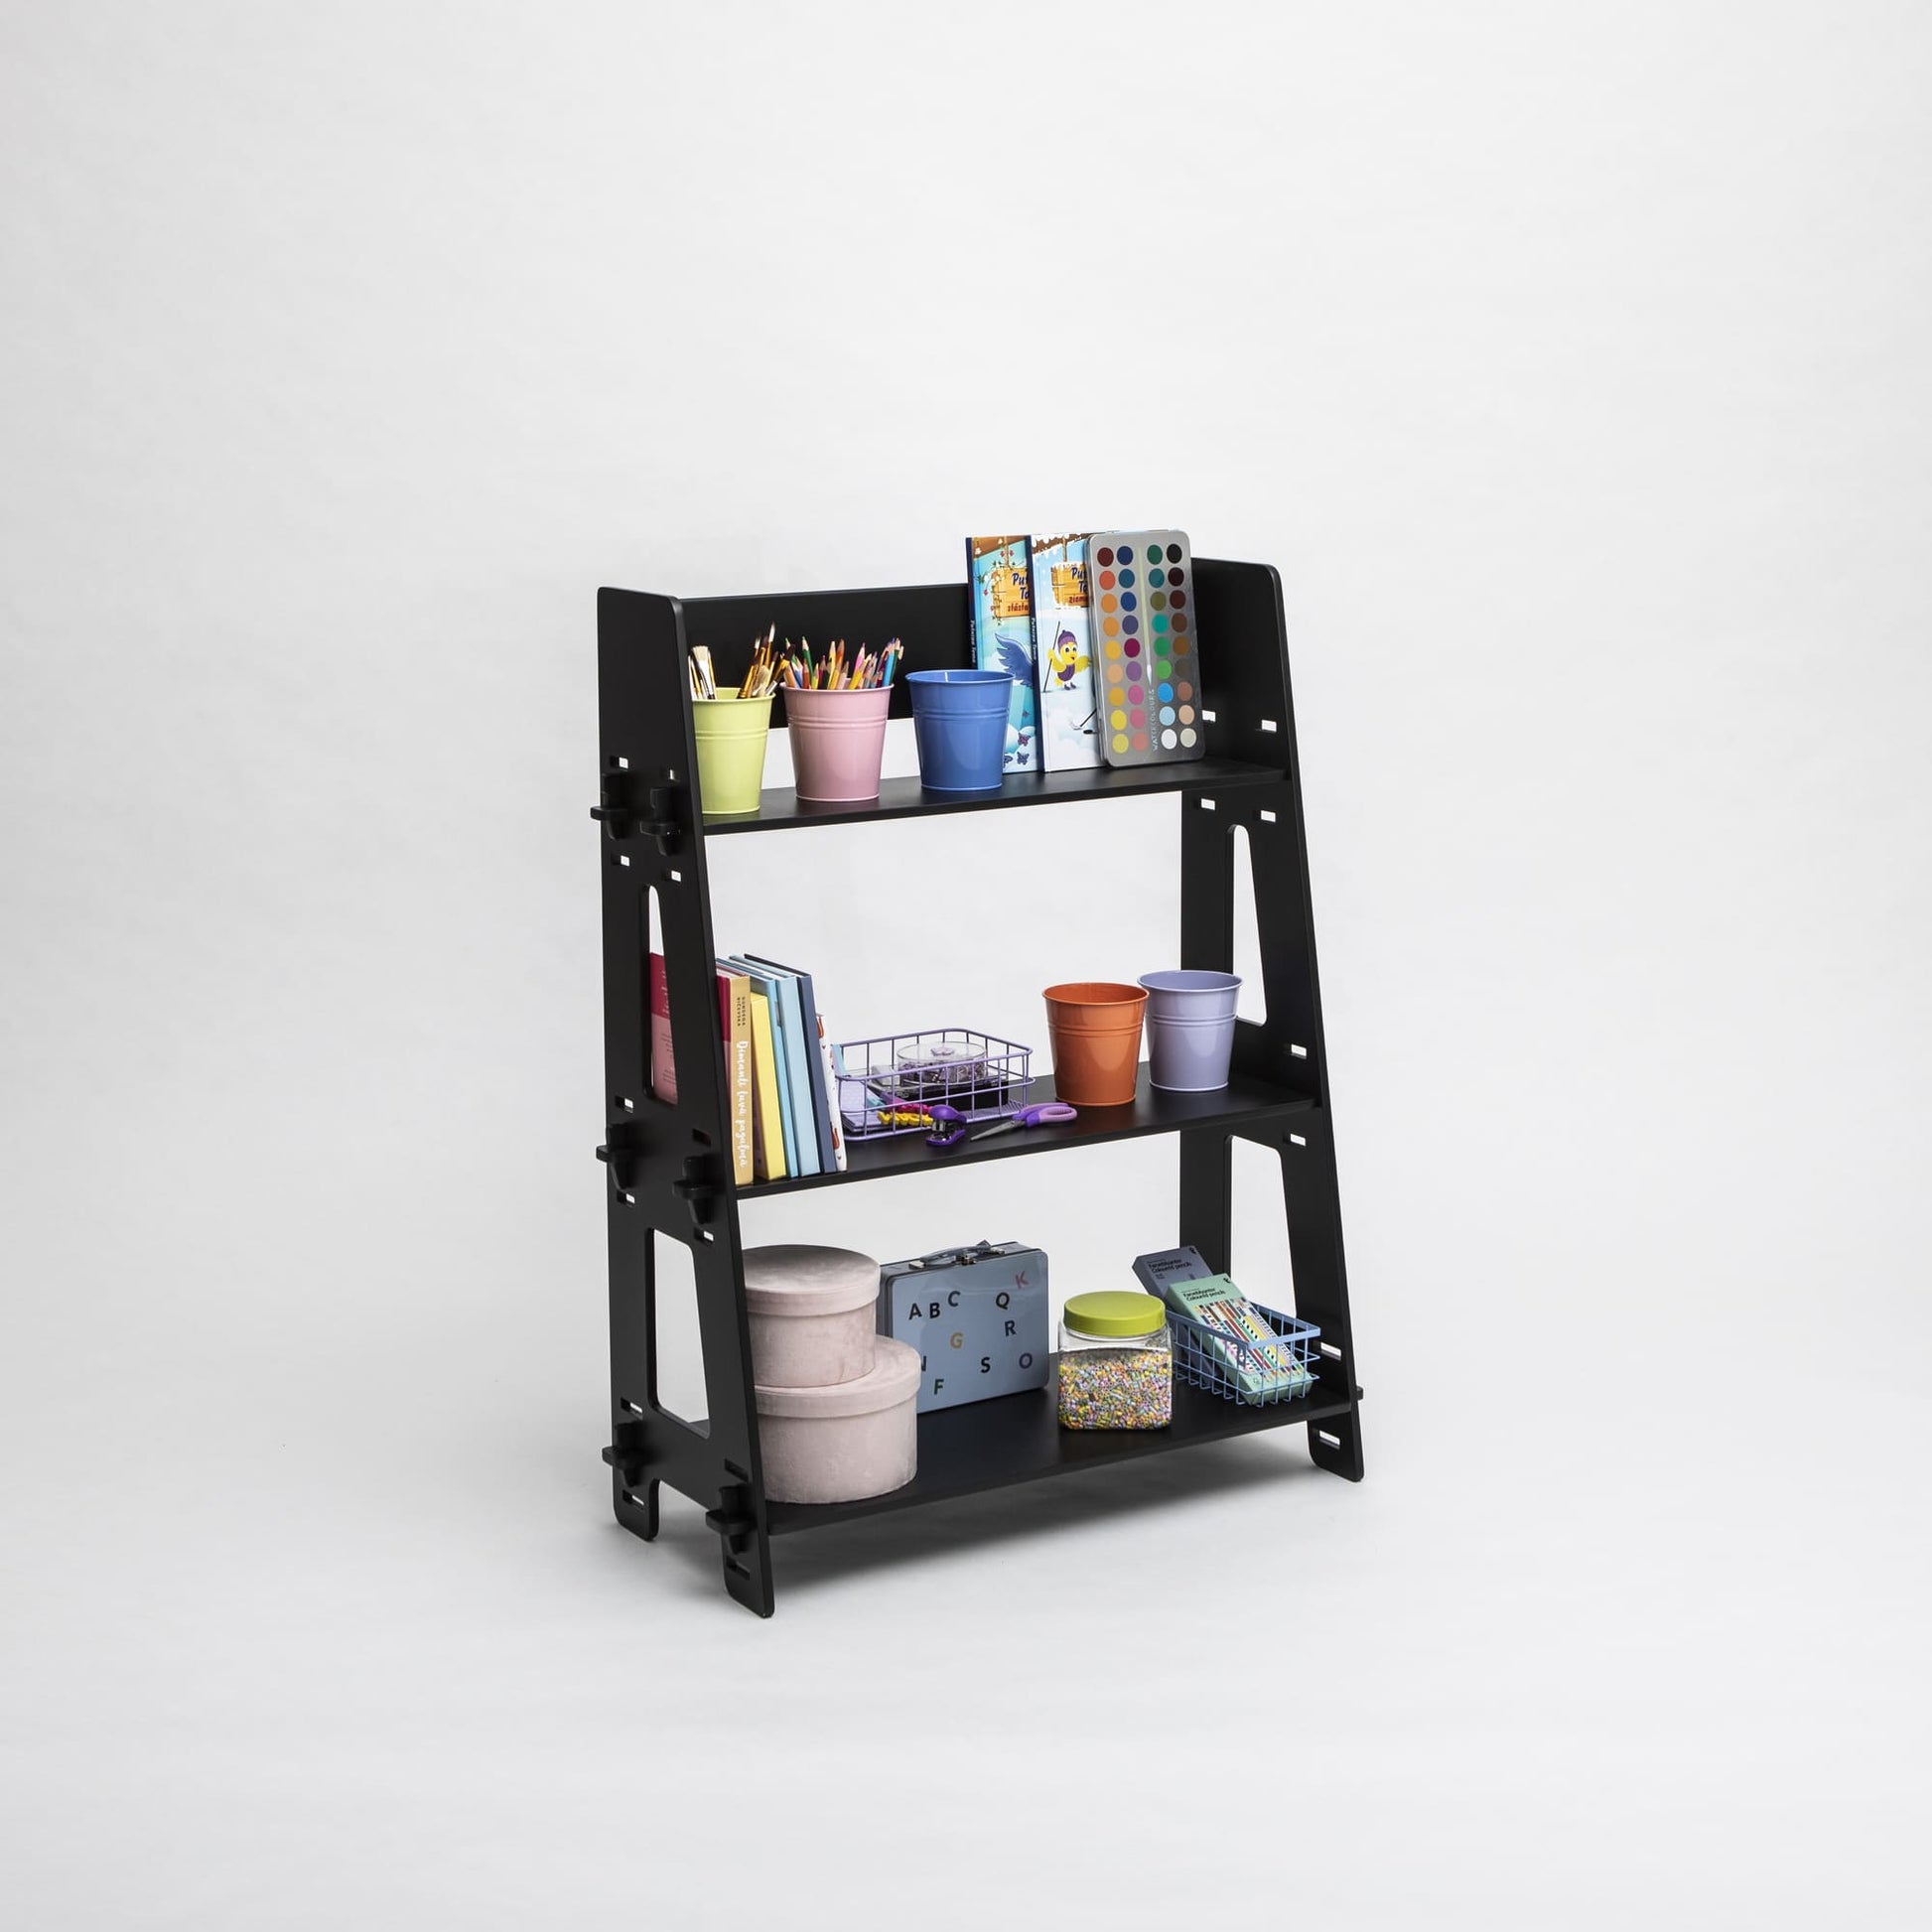 A black three-tiered Montessori toy shelf filled with art supplies, books, and storage boxes against a plain white background, perfect for nursery organization.